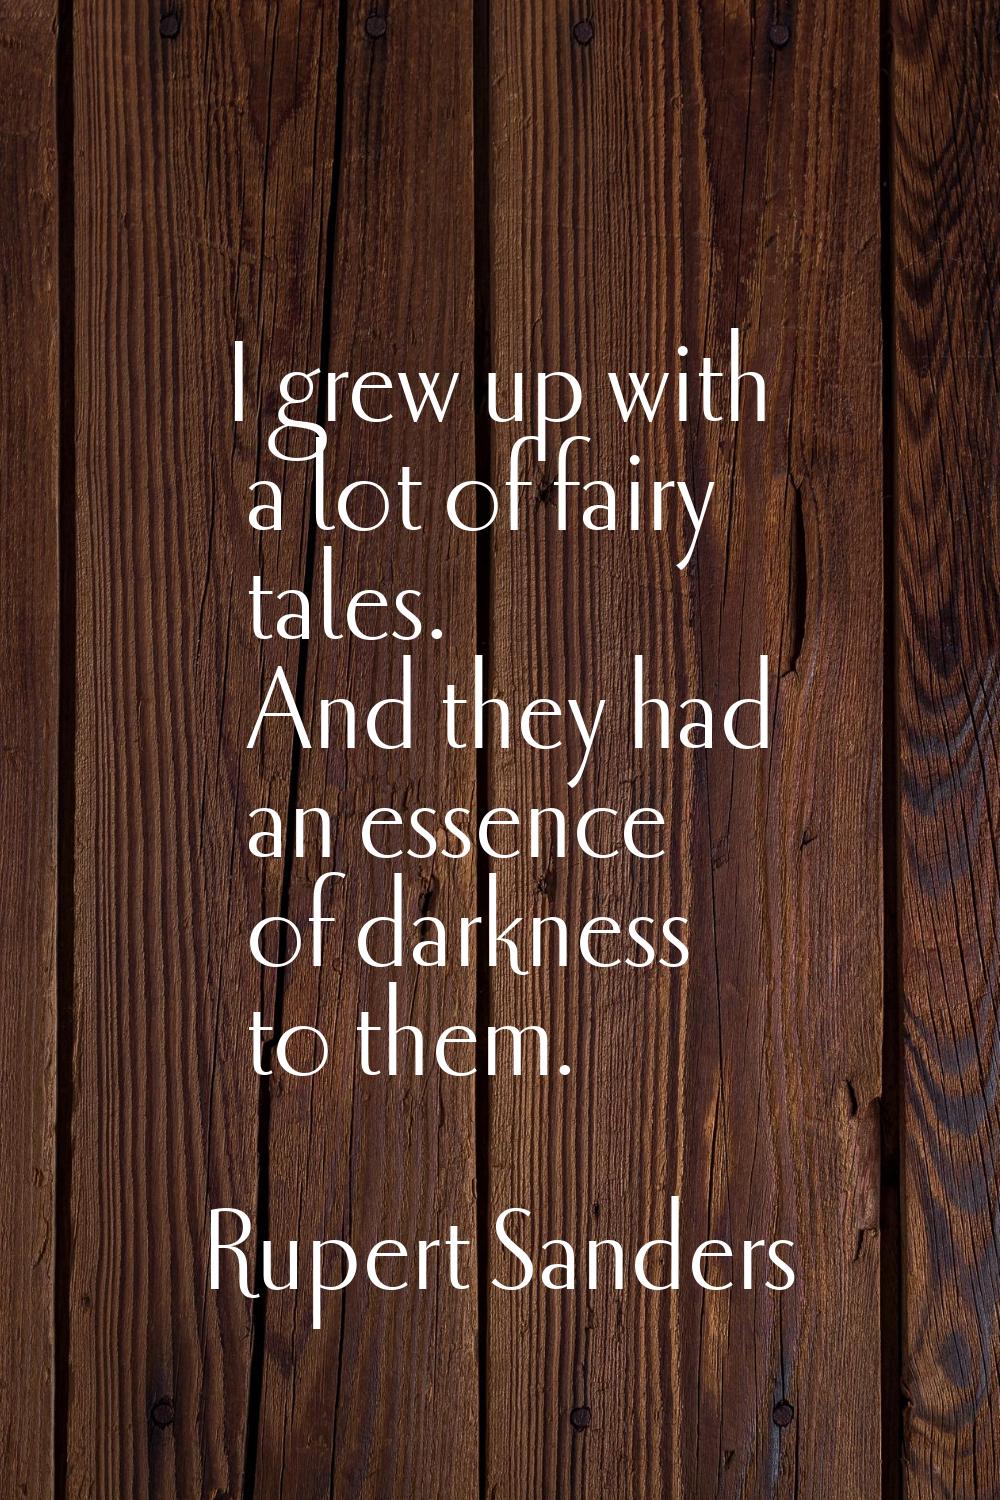 I grew up with a lot of fairy tales. And they had an essence of darkness to them.